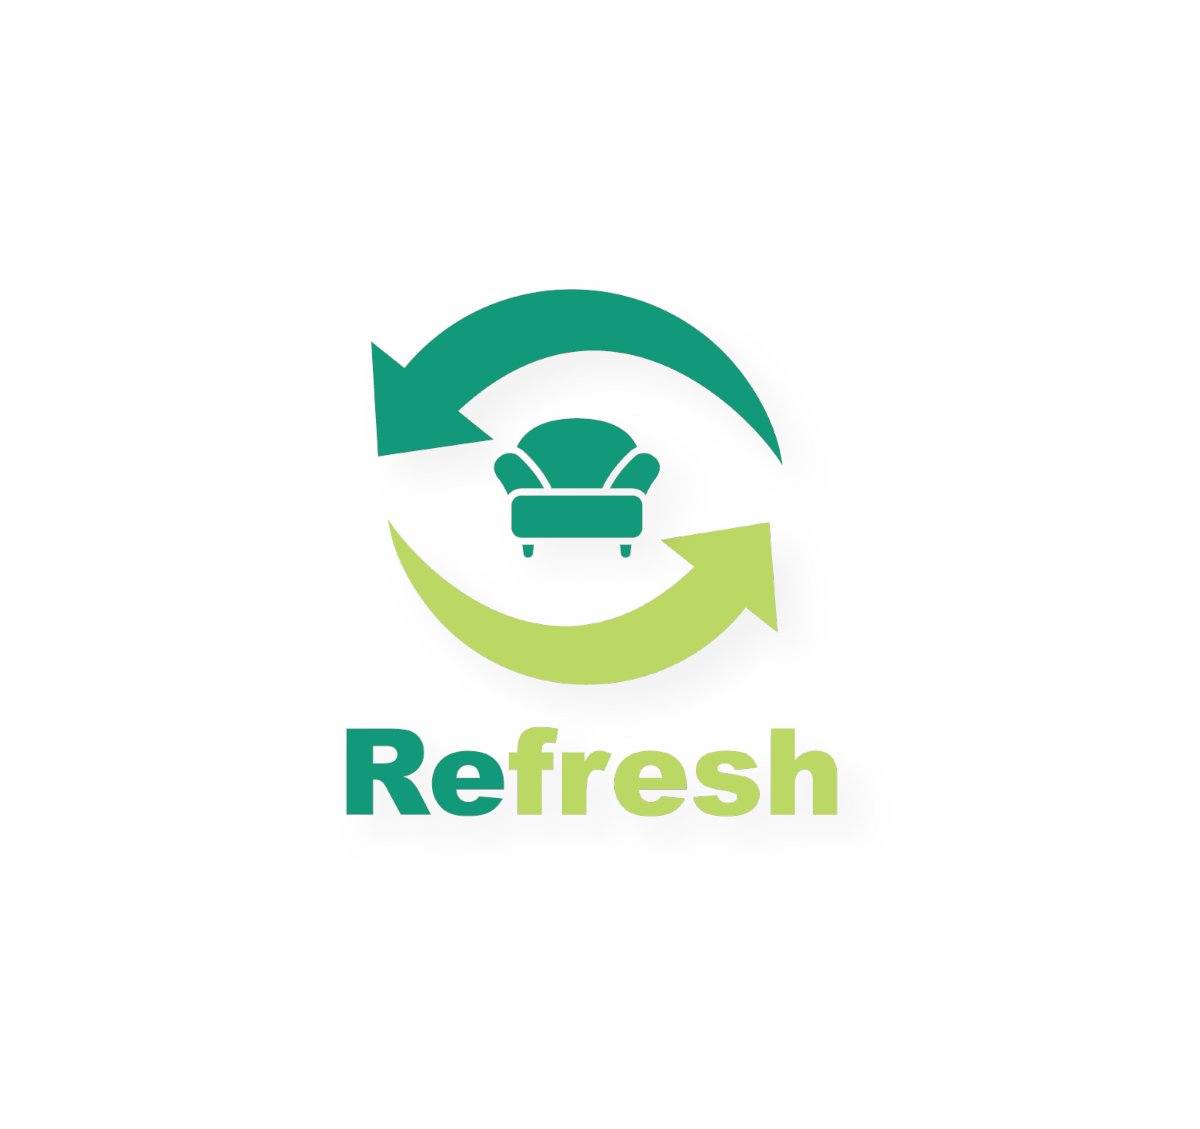 🎉 Refresh has been refreshed! 🎉 Refresh is an award-winning partnership between Magenta Living, community organisation Bee Wirral and Wirral Council and it has recently updated its logo to represent a fresh approach. Read more about the partnership 👉 magentaliving.org.uk/news/refresh-h…